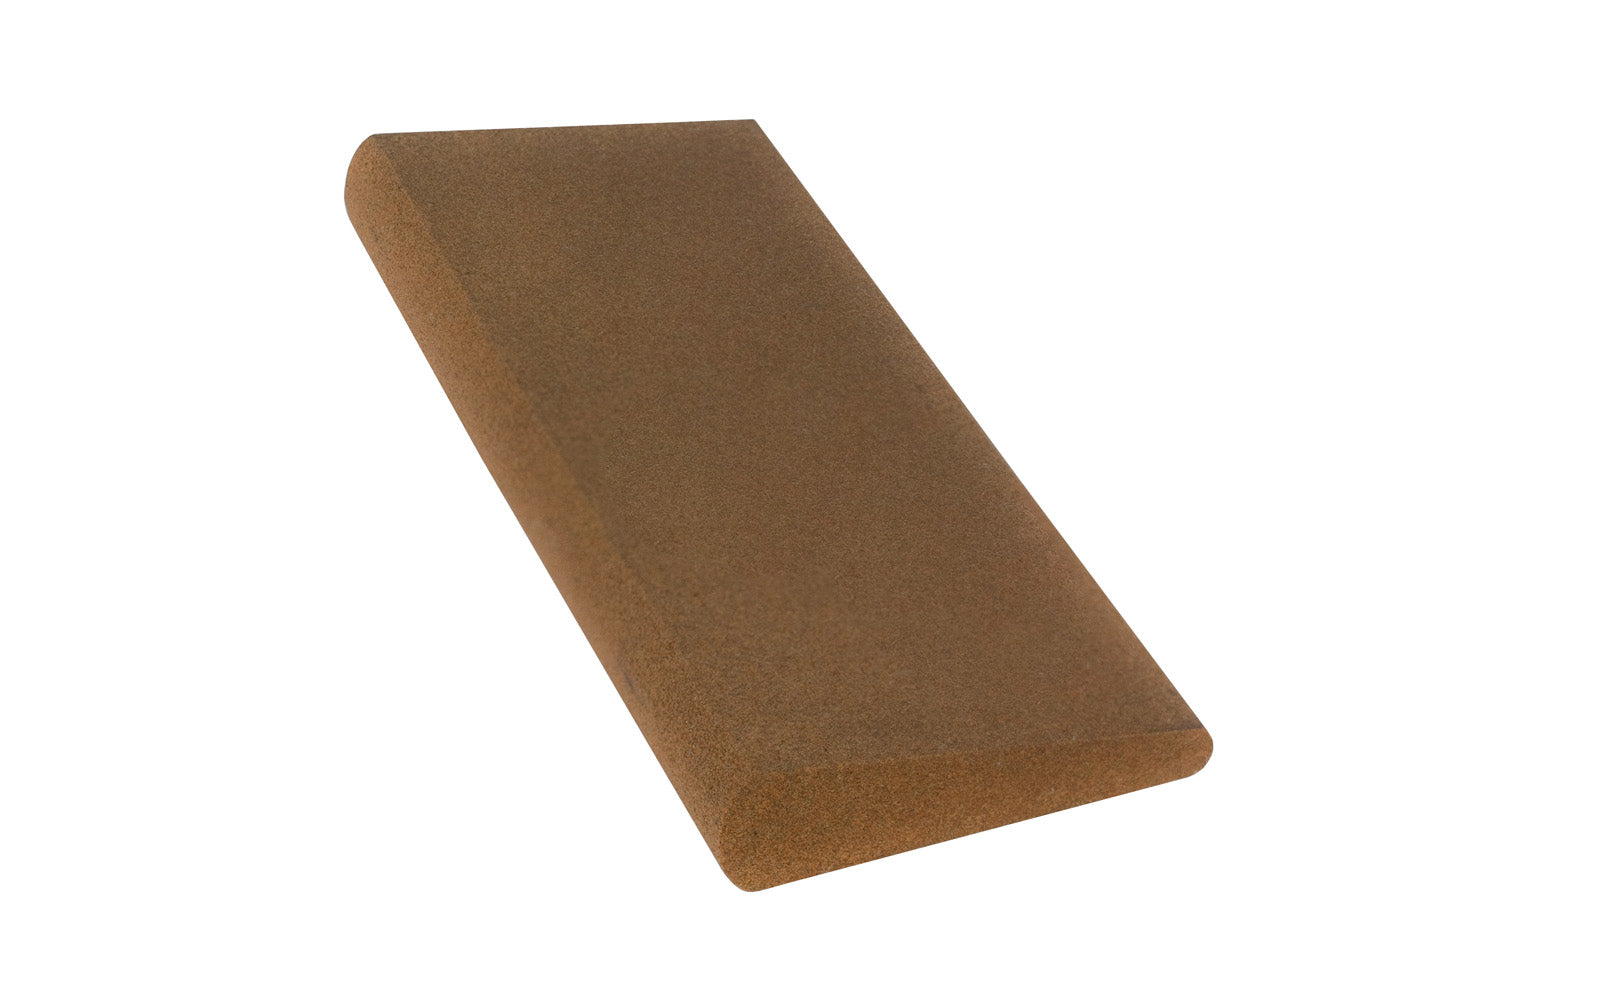 Norton Round Edge India Slip Stone with medium grit aluminum oxide abrasive. To improve sharpening & reduce clogging, use with oil. Great for sharpening carving tools & gouges. 4-1/2" length x 1-3/4" width -  1/2" x 3/16" thickness. Oilstone made by Norton, Saint Gobain. Model MS-44. 